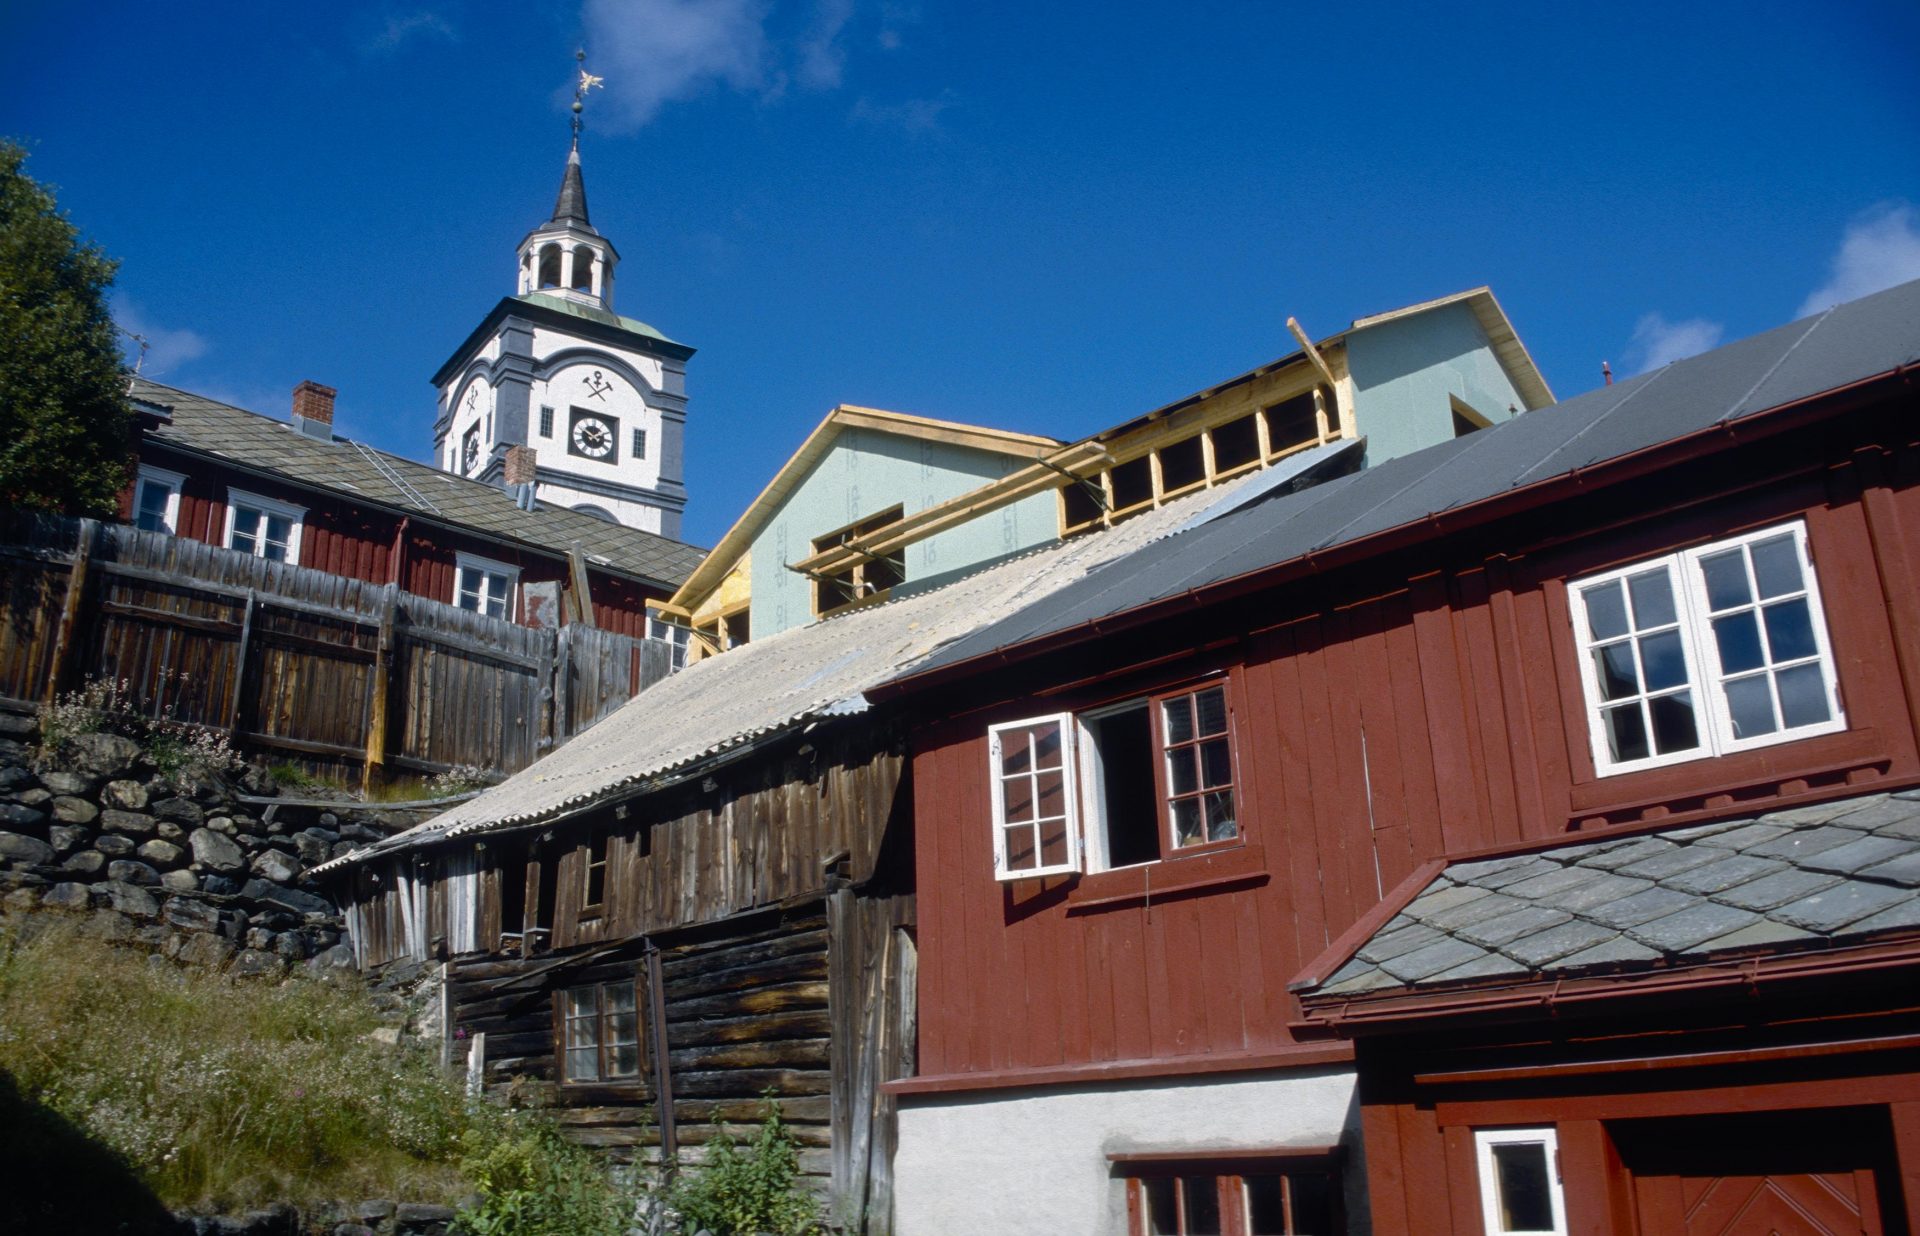 The World Heritage site in Røros features diverse architectural structures. Photo: Trond Taugbøl, the Directorate for Cultural Heritage